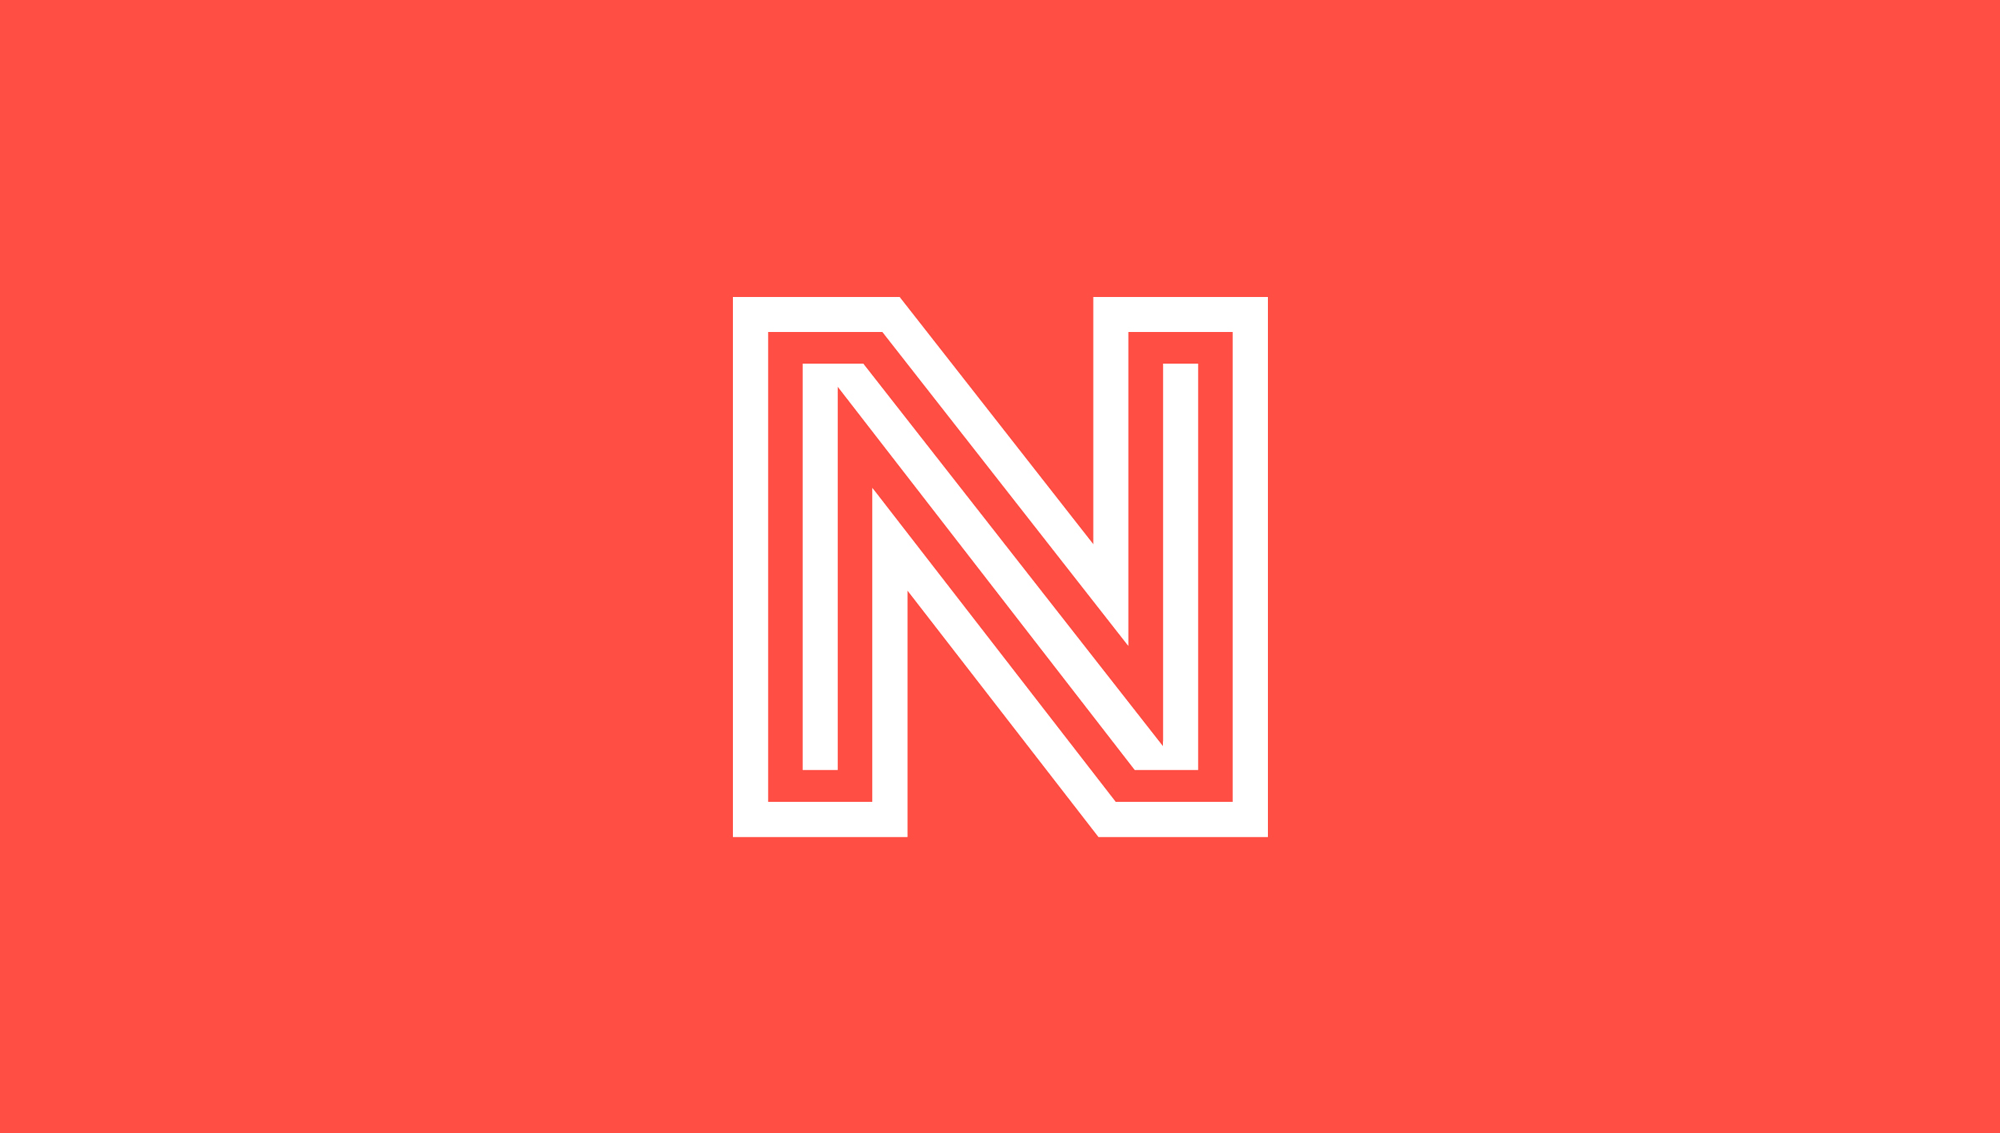 New Logo and Identity for Norwich Theatre by Rose